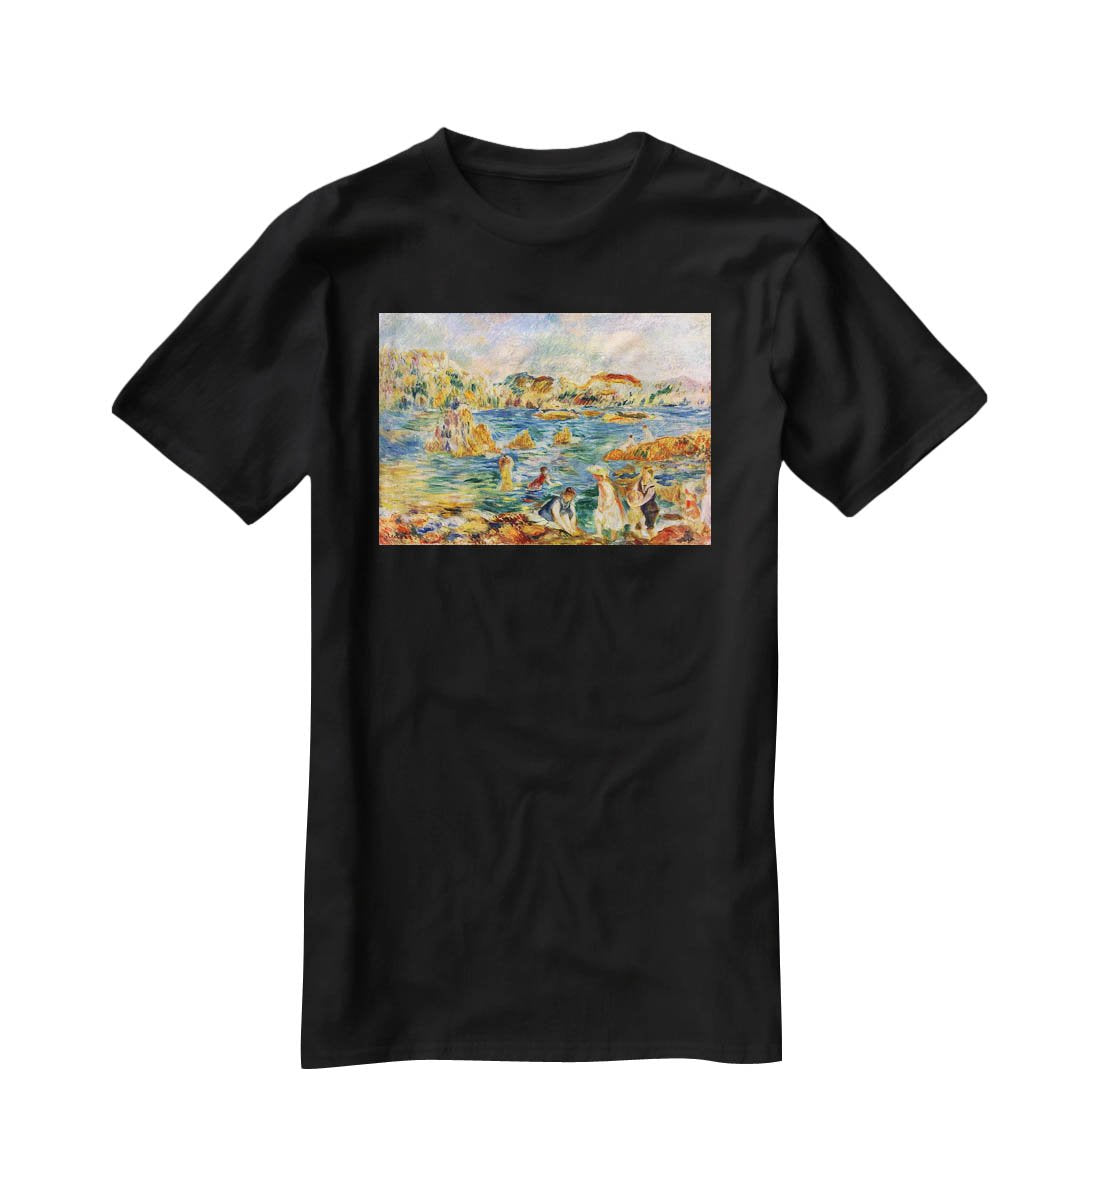 At the beach of Guernesey by Renoir T-Shirt - Canvas Art Rocks - 1